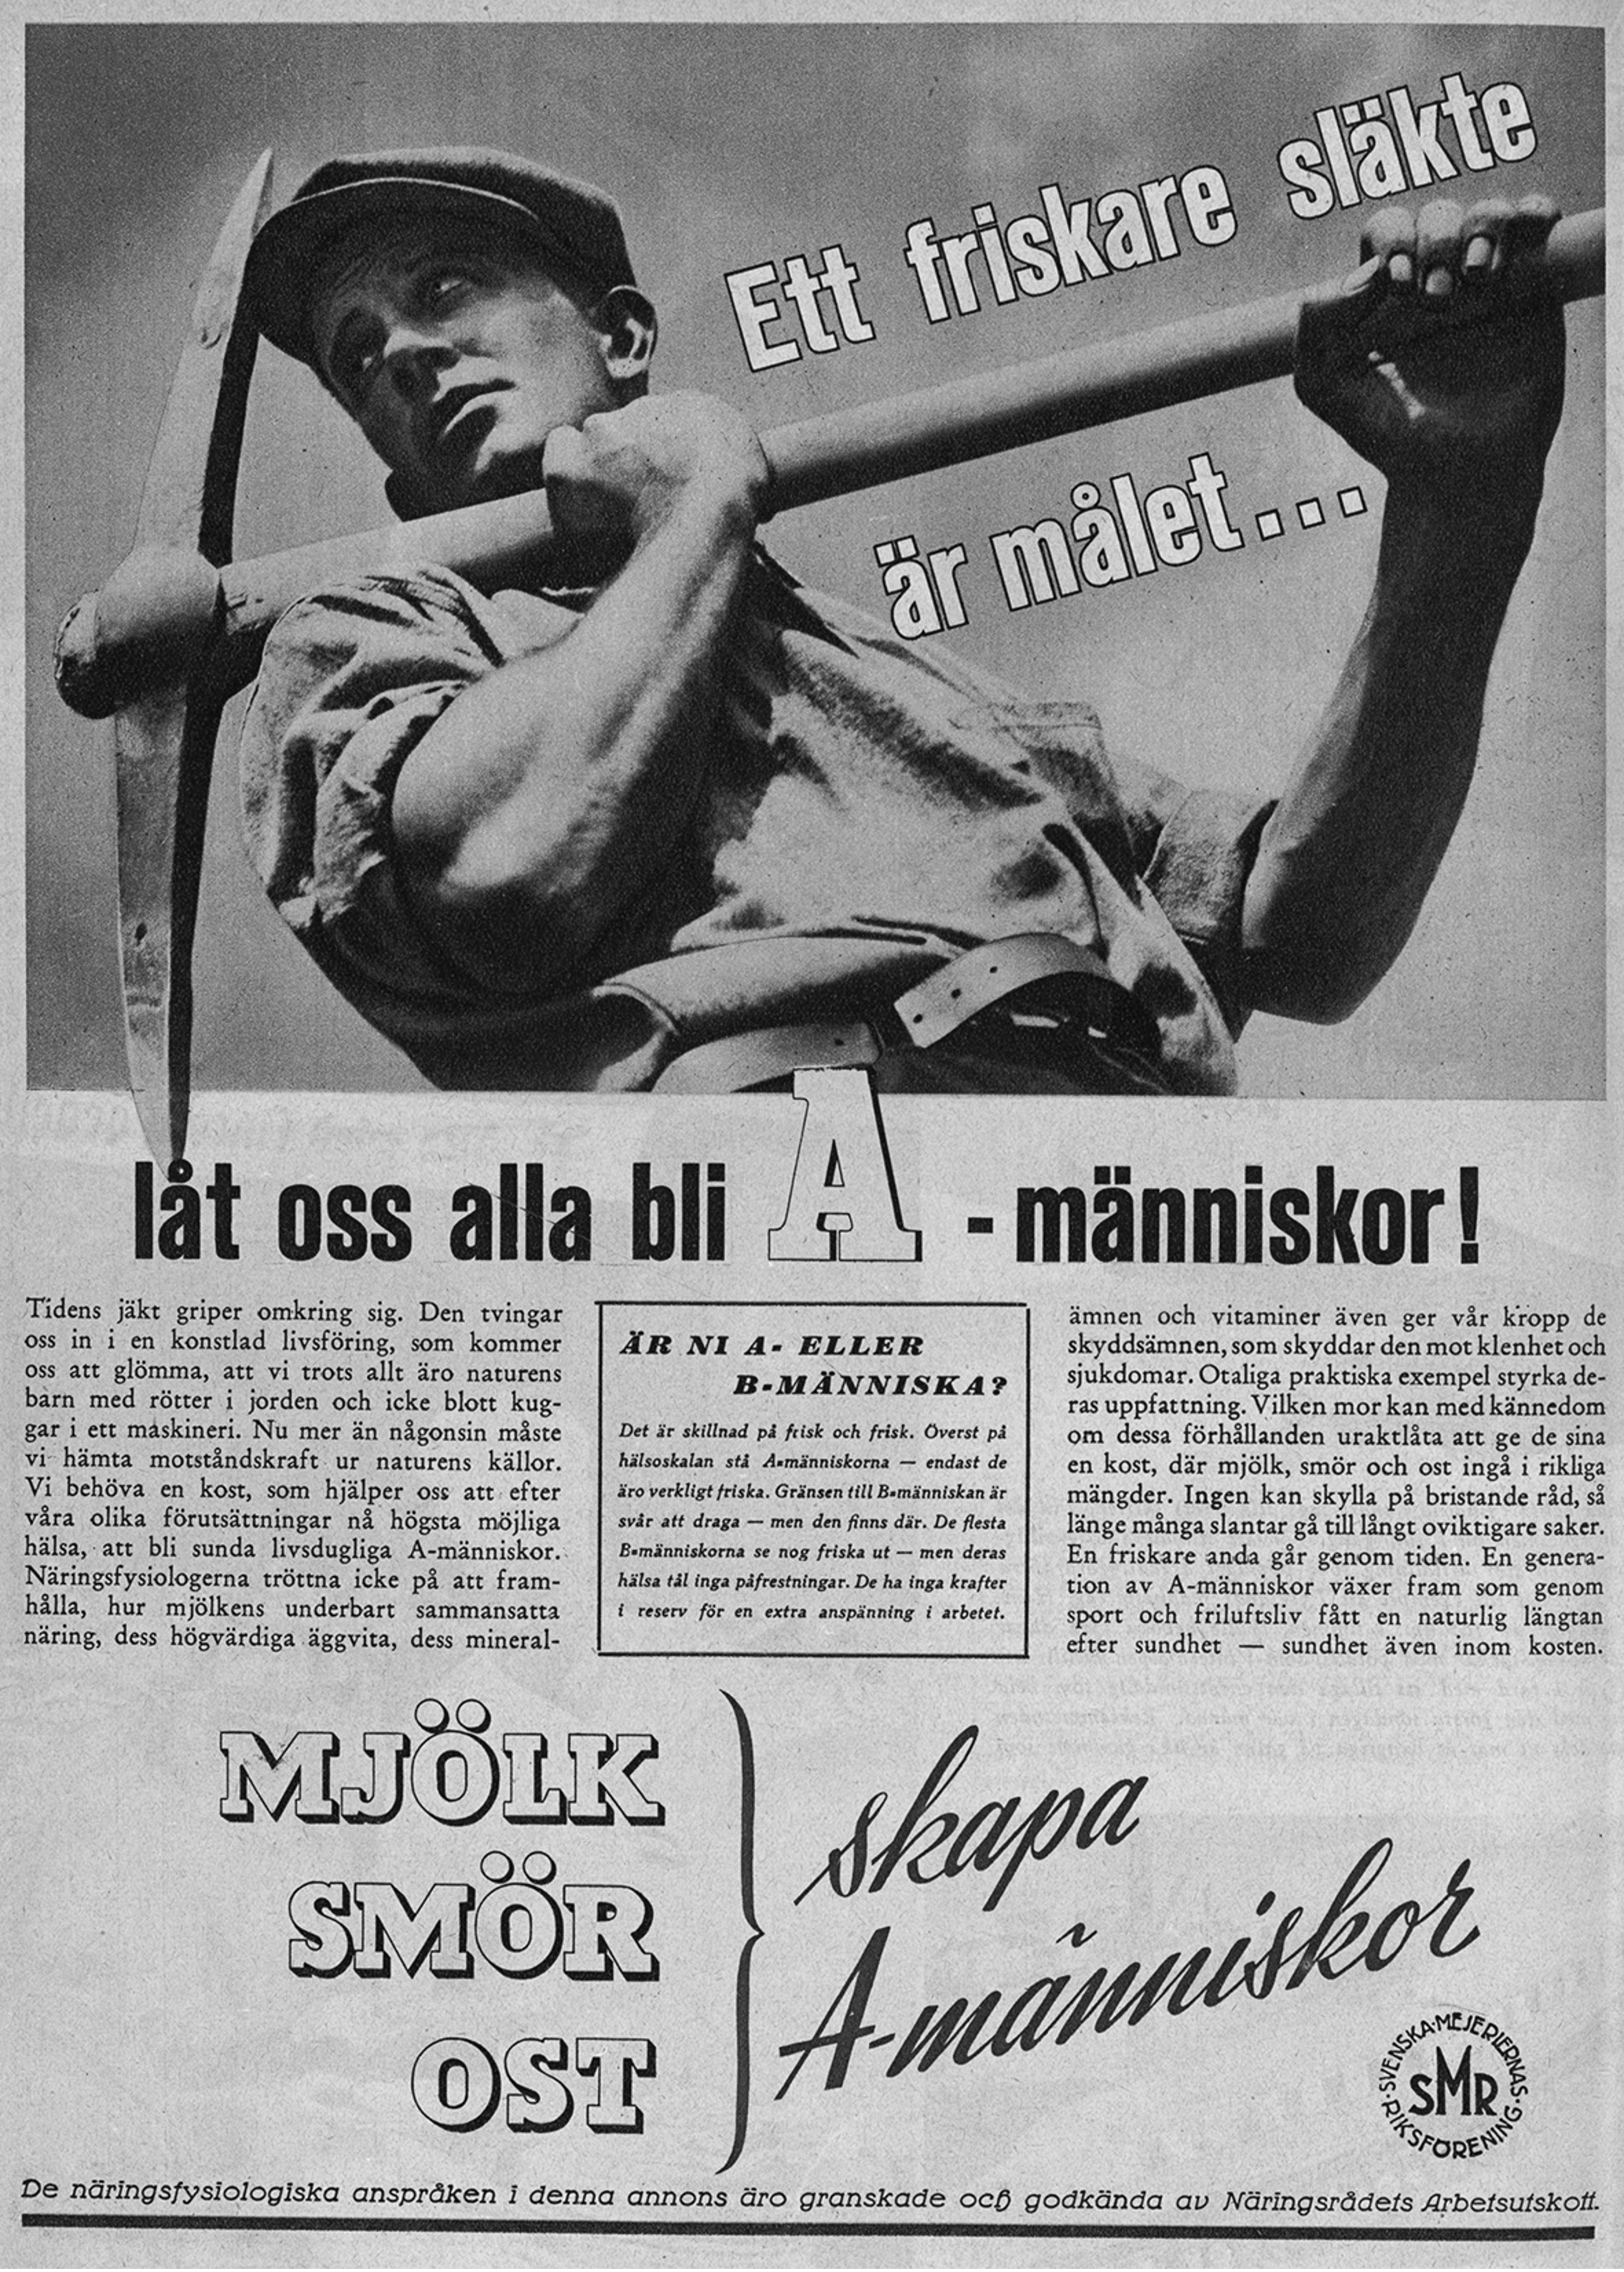 Svenska Mejeriernas Riksförening advert for dairy products, 1937, featuring text in Swedish and picture man carrying pickaxe